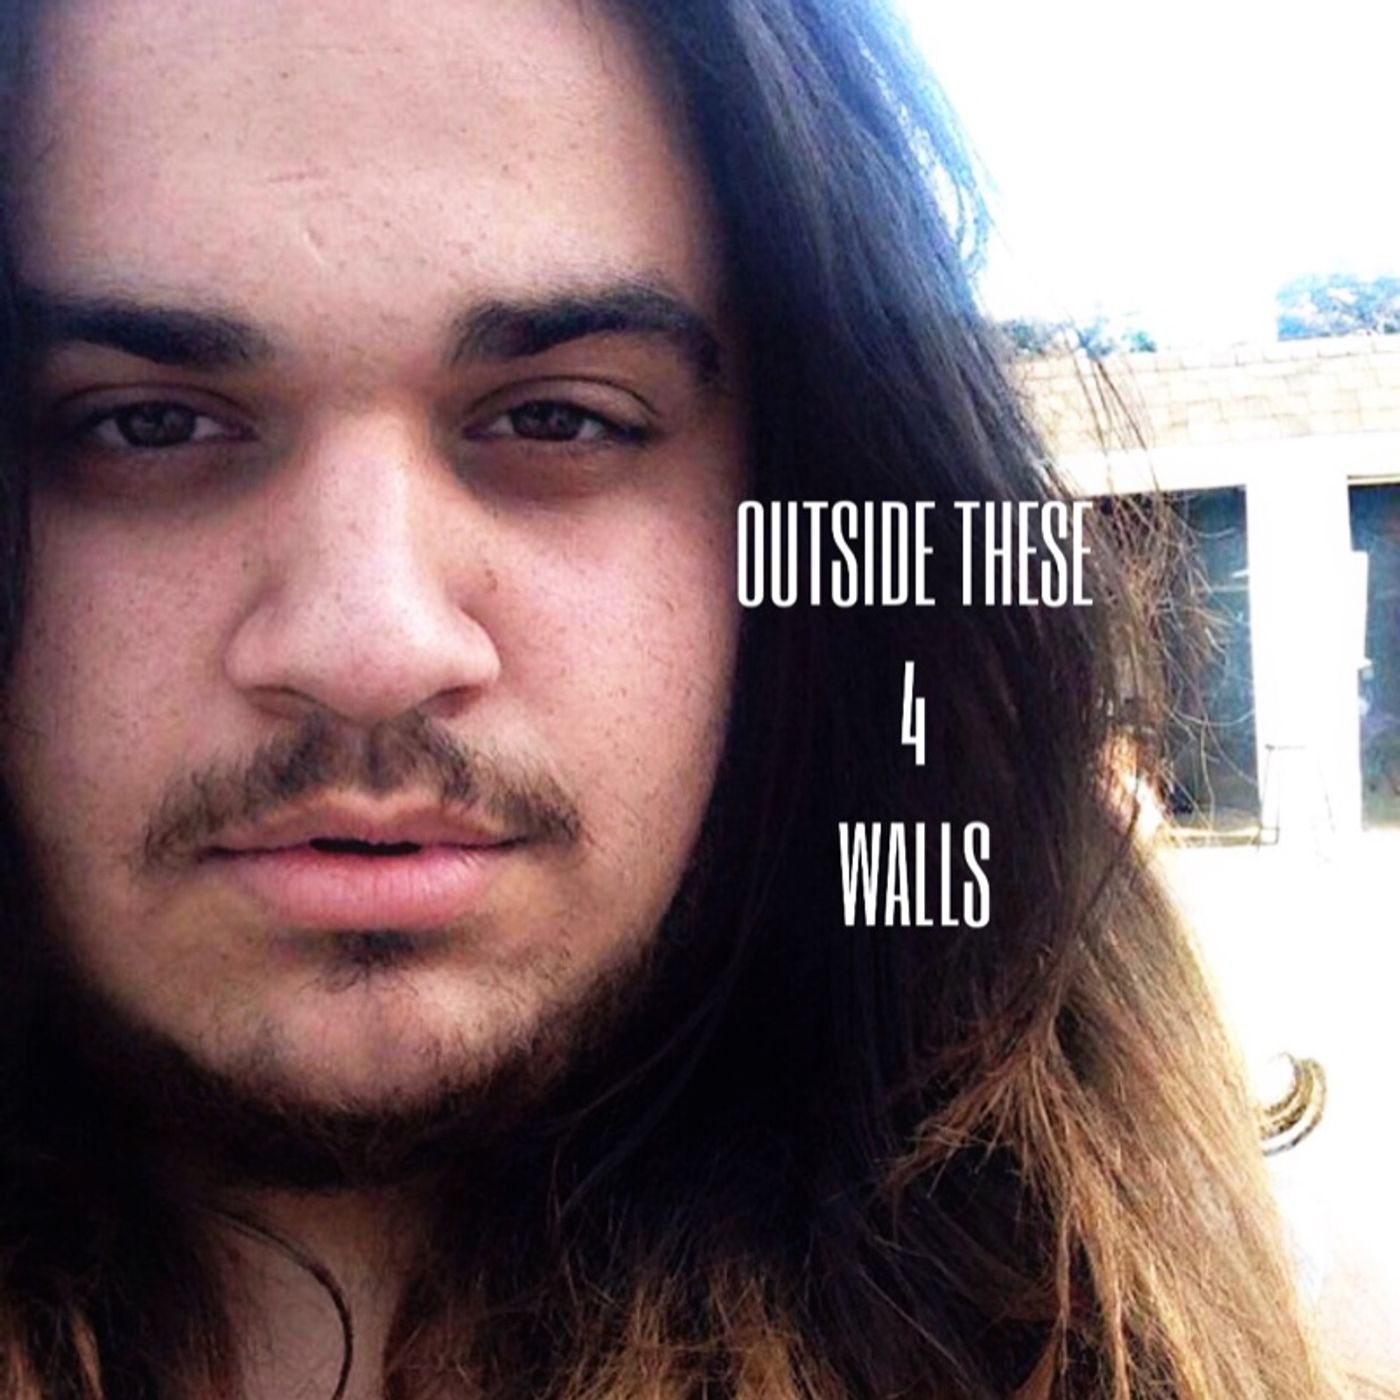 Outside These 4 Walls